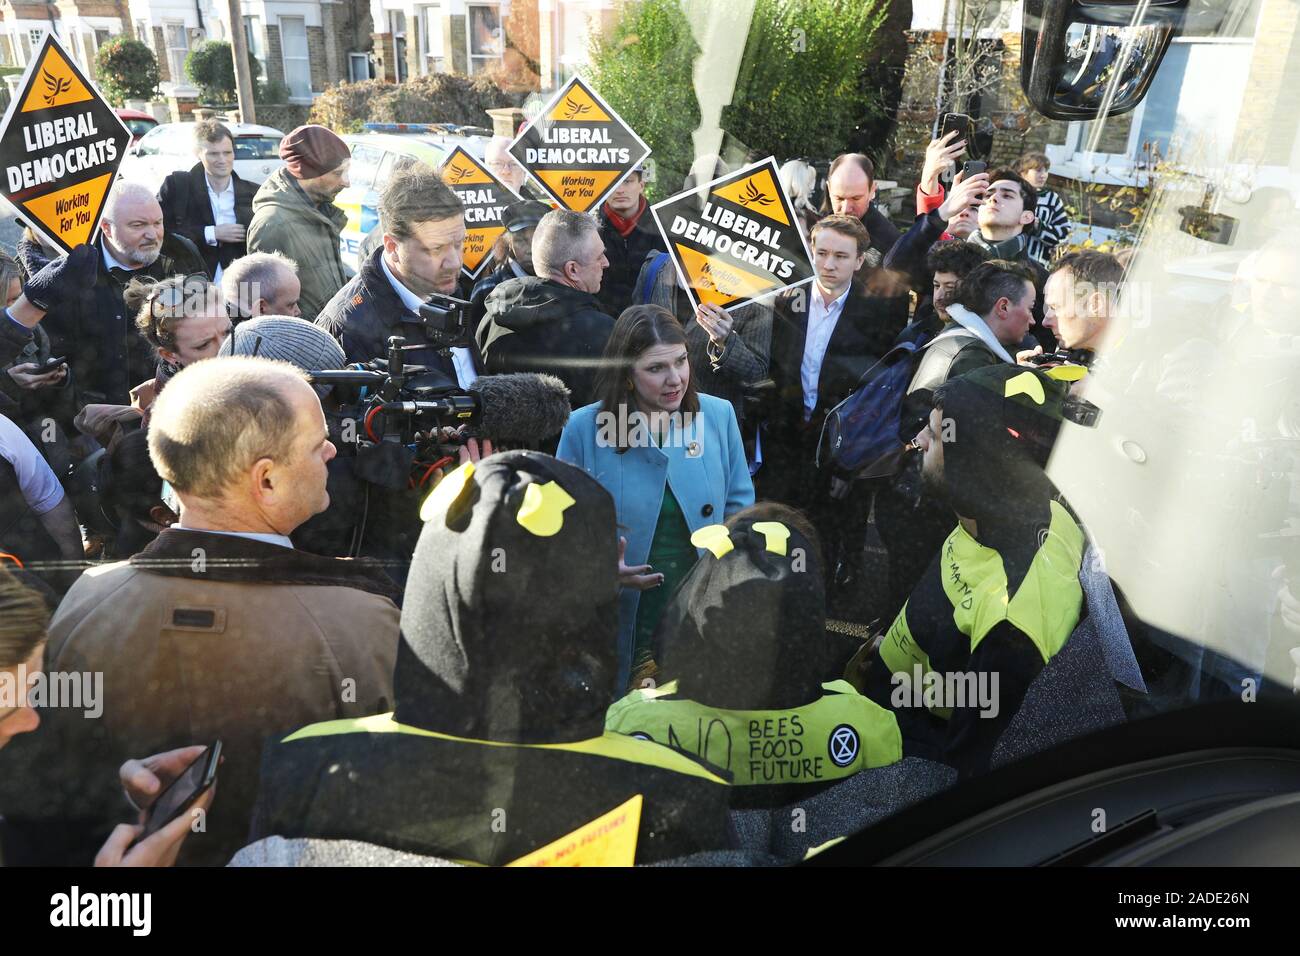 Liberal Democrat leader Jo Swinson speaks to Extinction Rebellion protesters dressed as bees after they glued themselves to the party's battle bus during a visit to Knights Youth Centre in London, while on the General Election campaign trail. Stock Photo